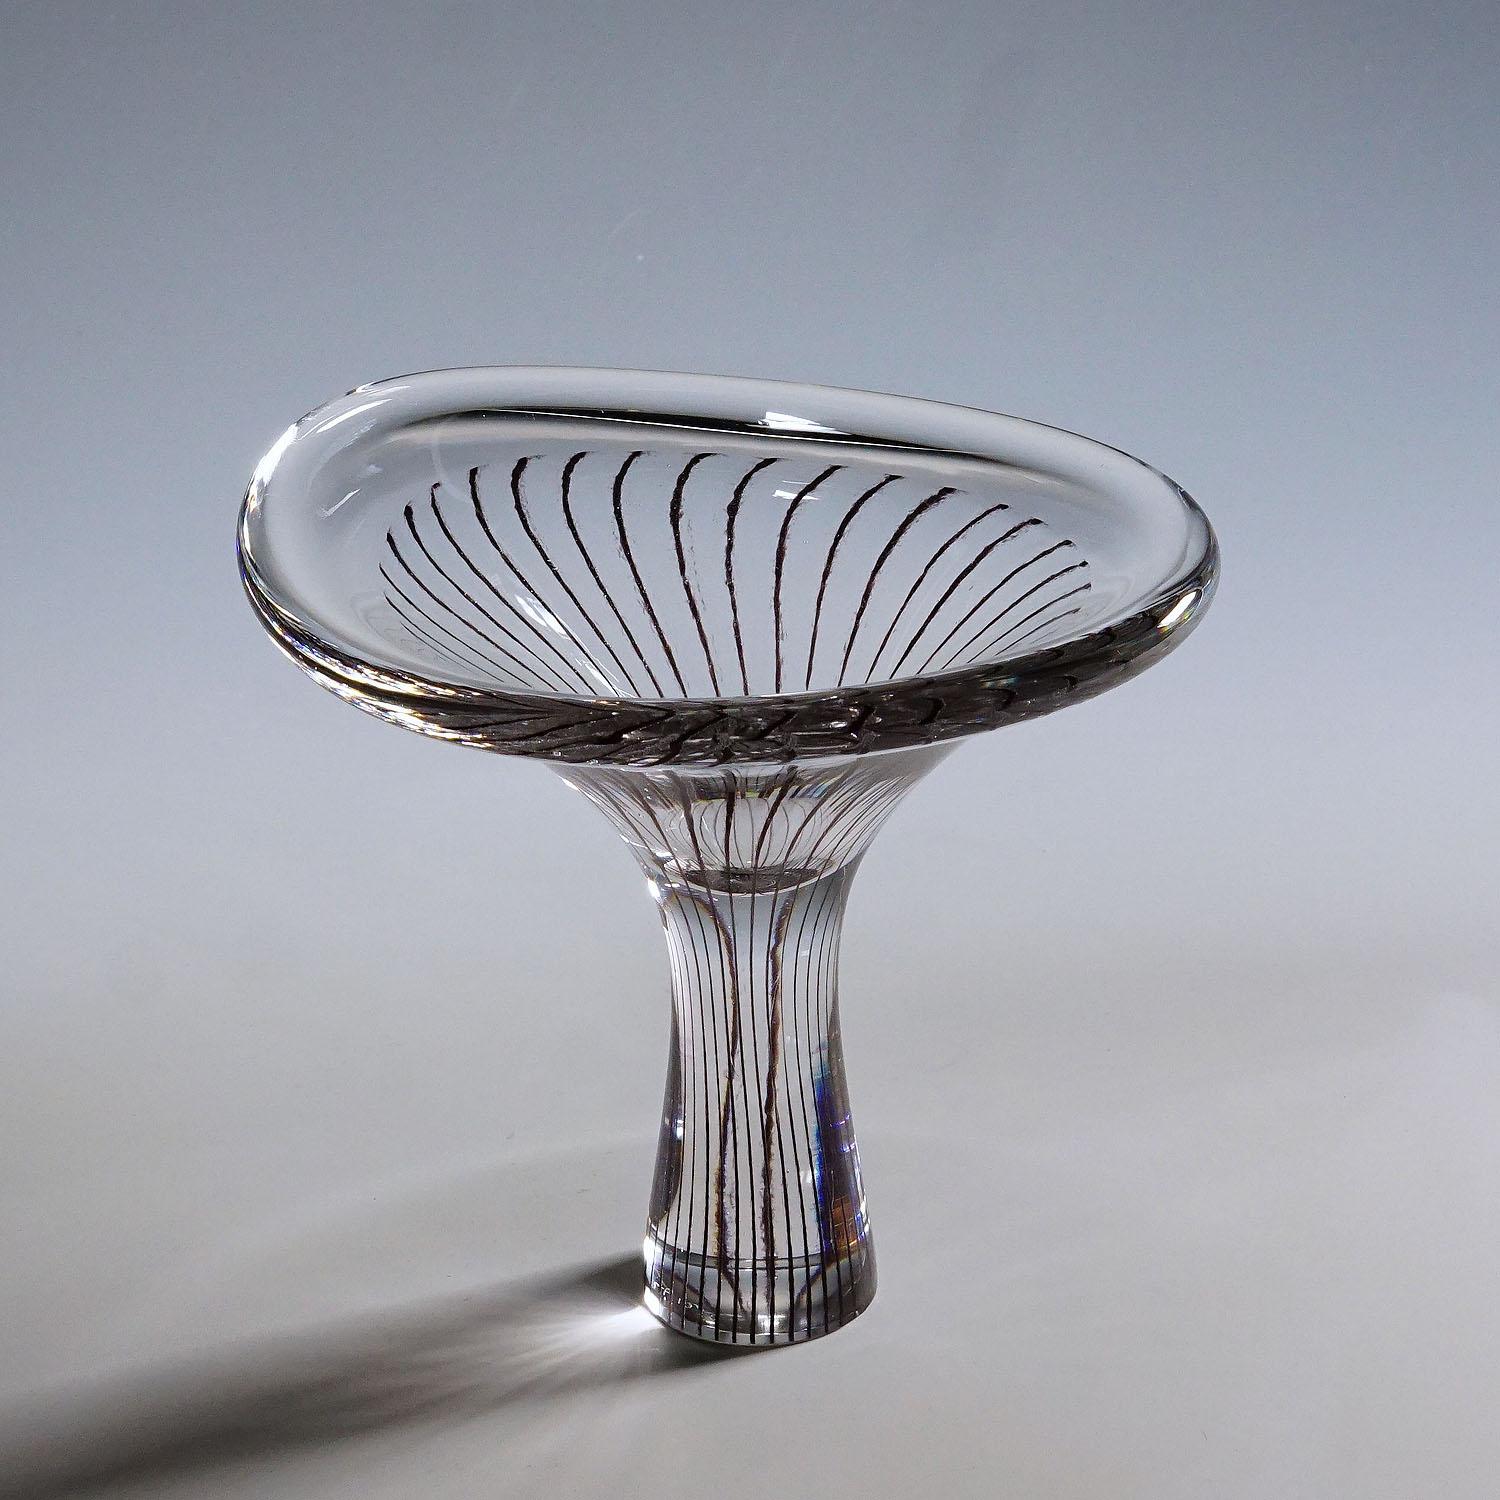 Vintage Chantarelle vase by Vicke Lindstrand for Kosta 1950s

A vintage art glass vase designed by Vicke Lindstrand and manufactured by Kosta Glassworks ca. 1950s. The clear glass vase is designed in the shape of a chanterelle and features thin